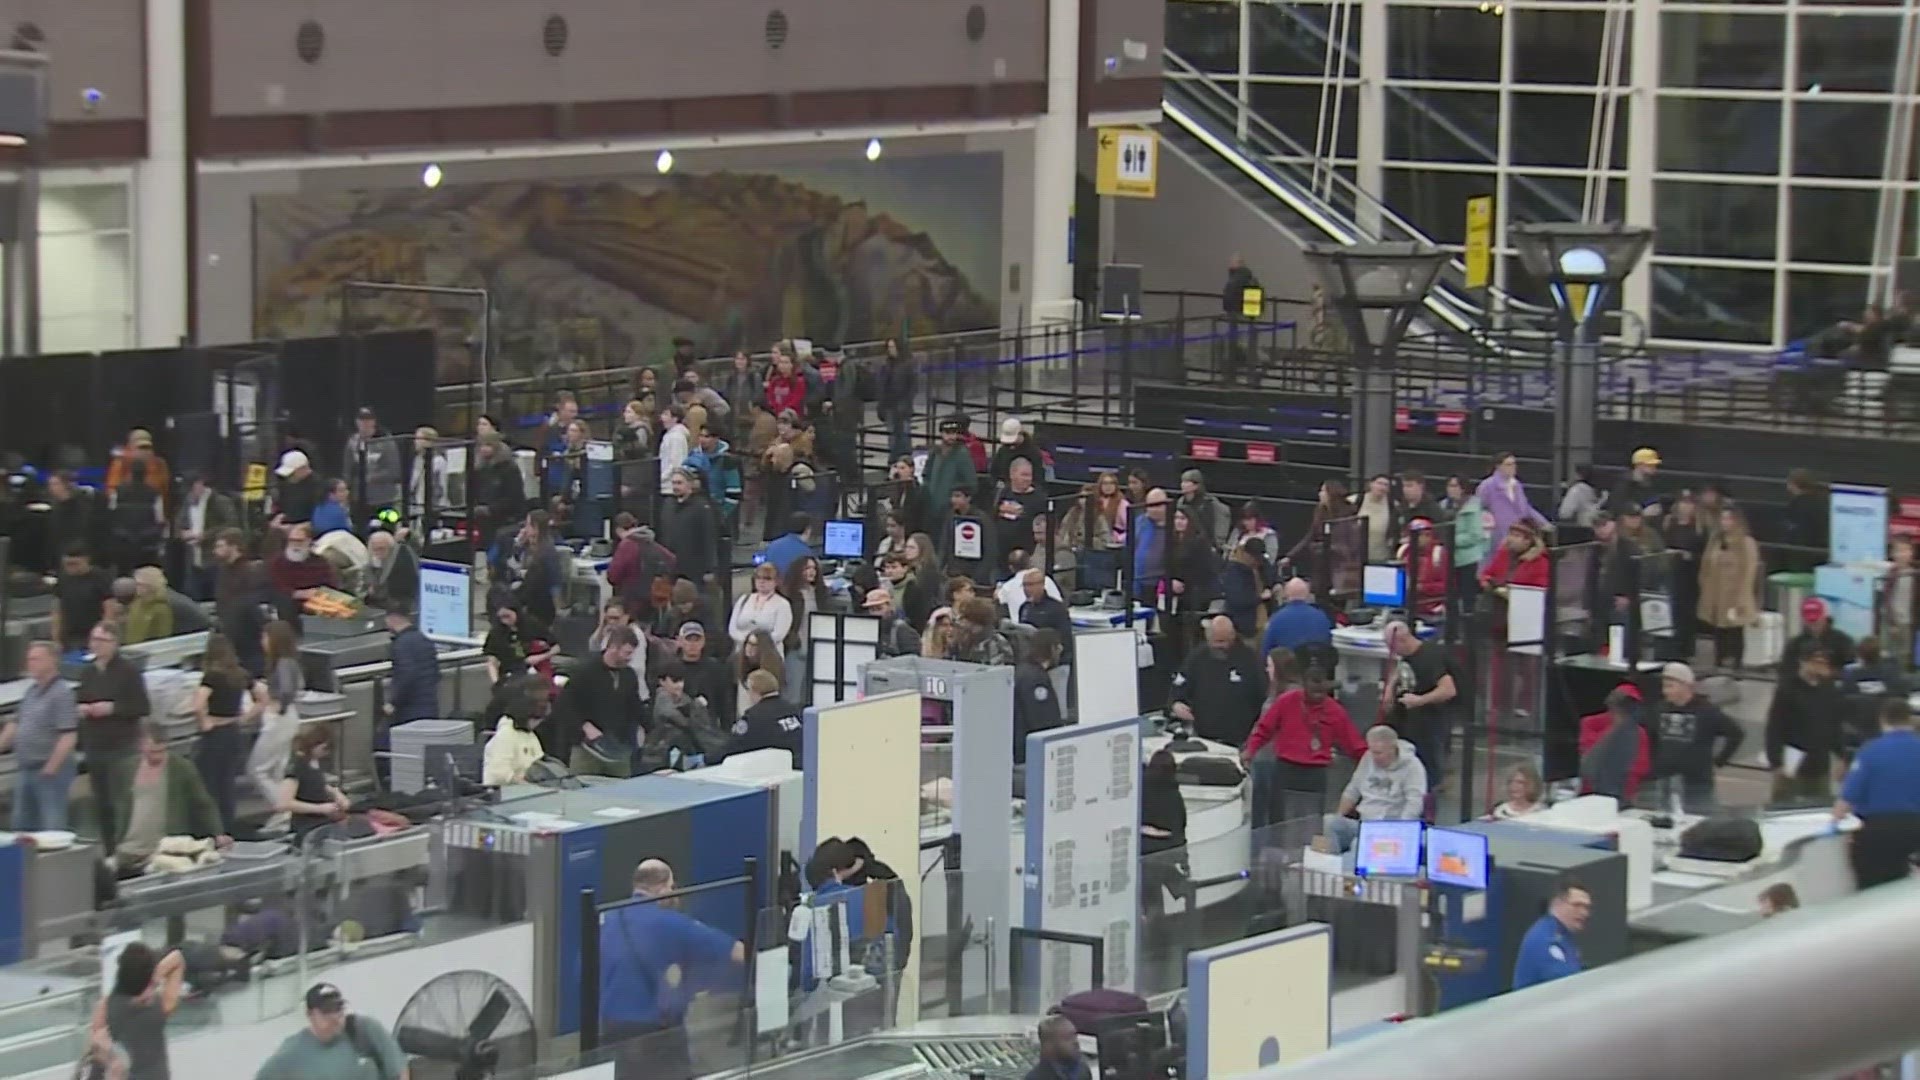 A winter storm has caused hundreds of flights to be canceled at Denver International Airport on Thursday.